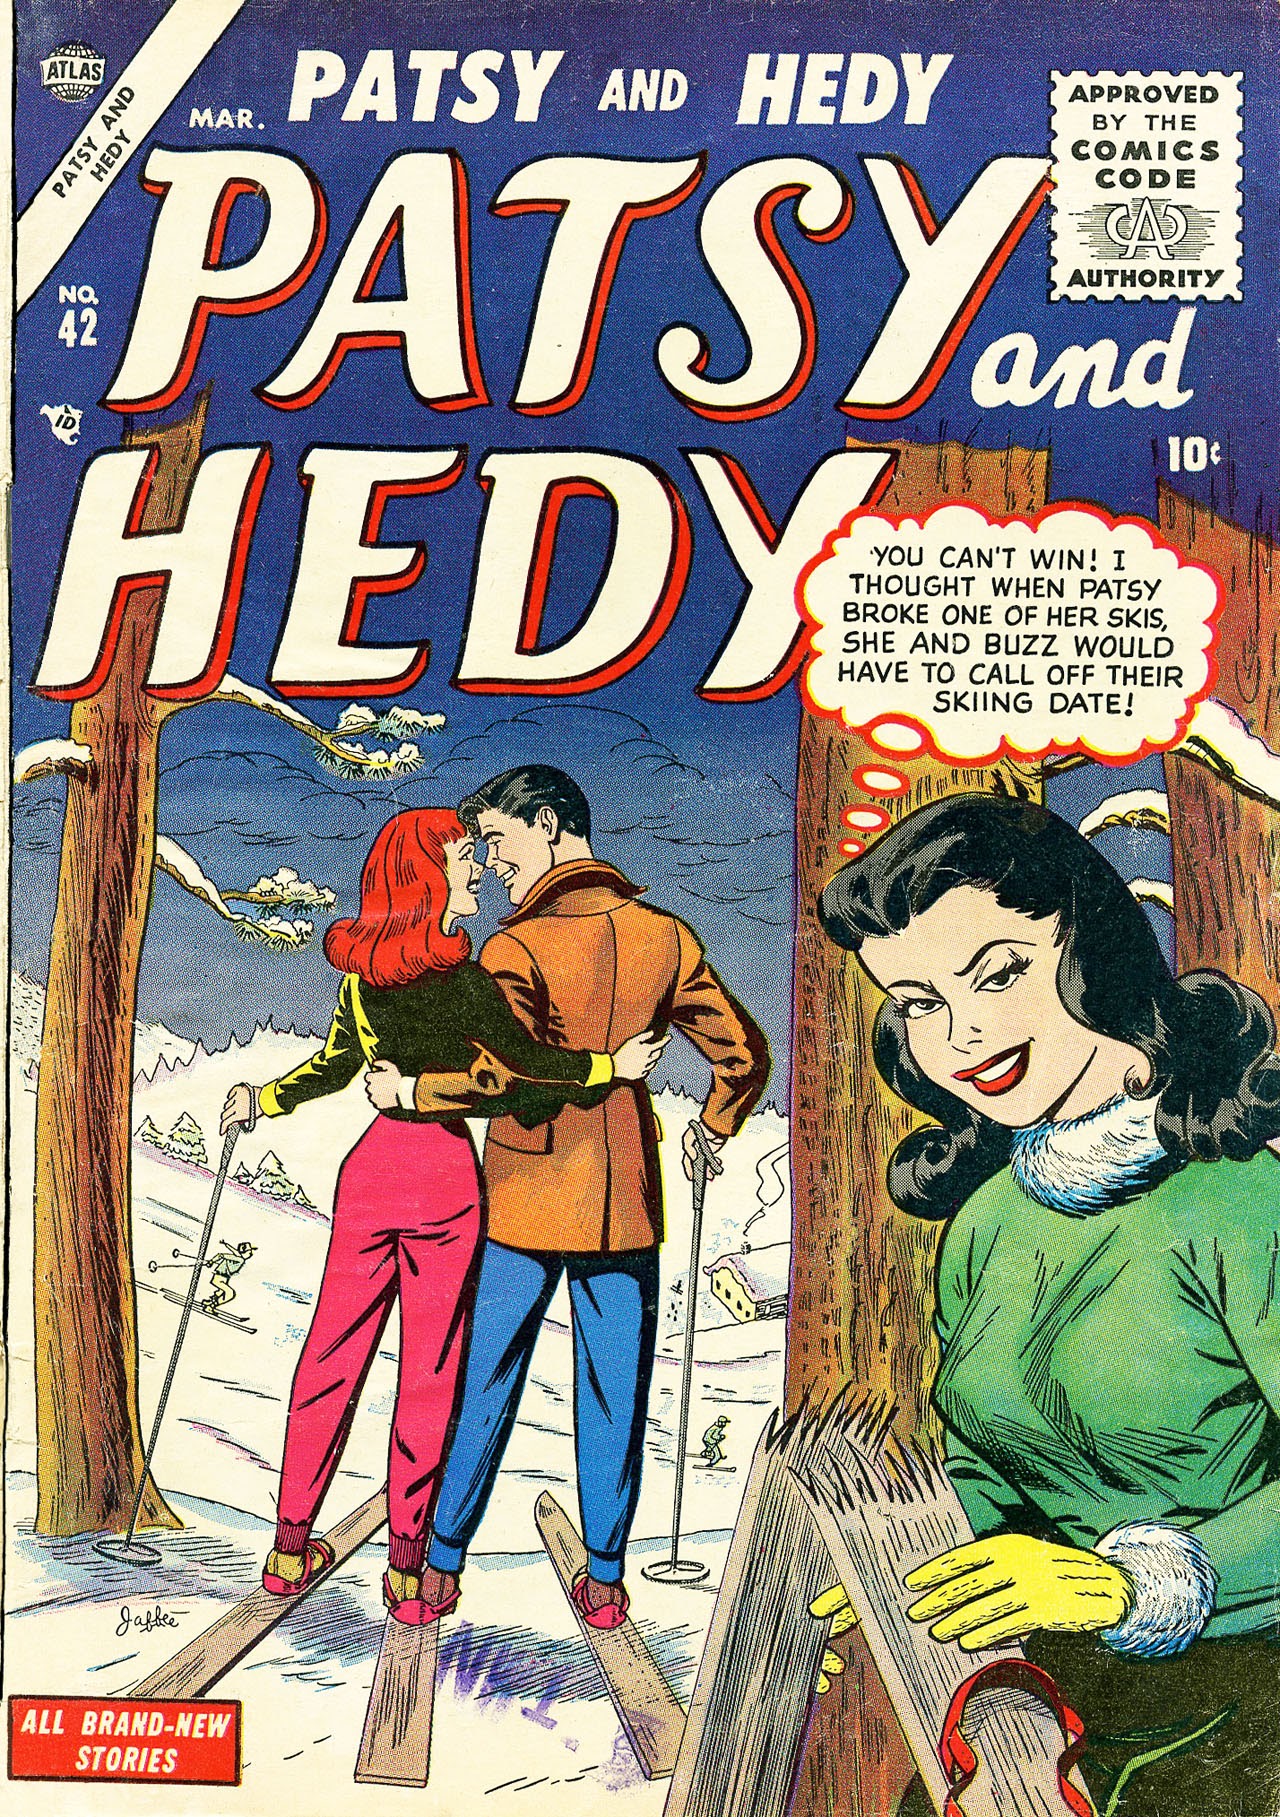 Read online Patsy and Hedy comic -  Issue #42 - 1